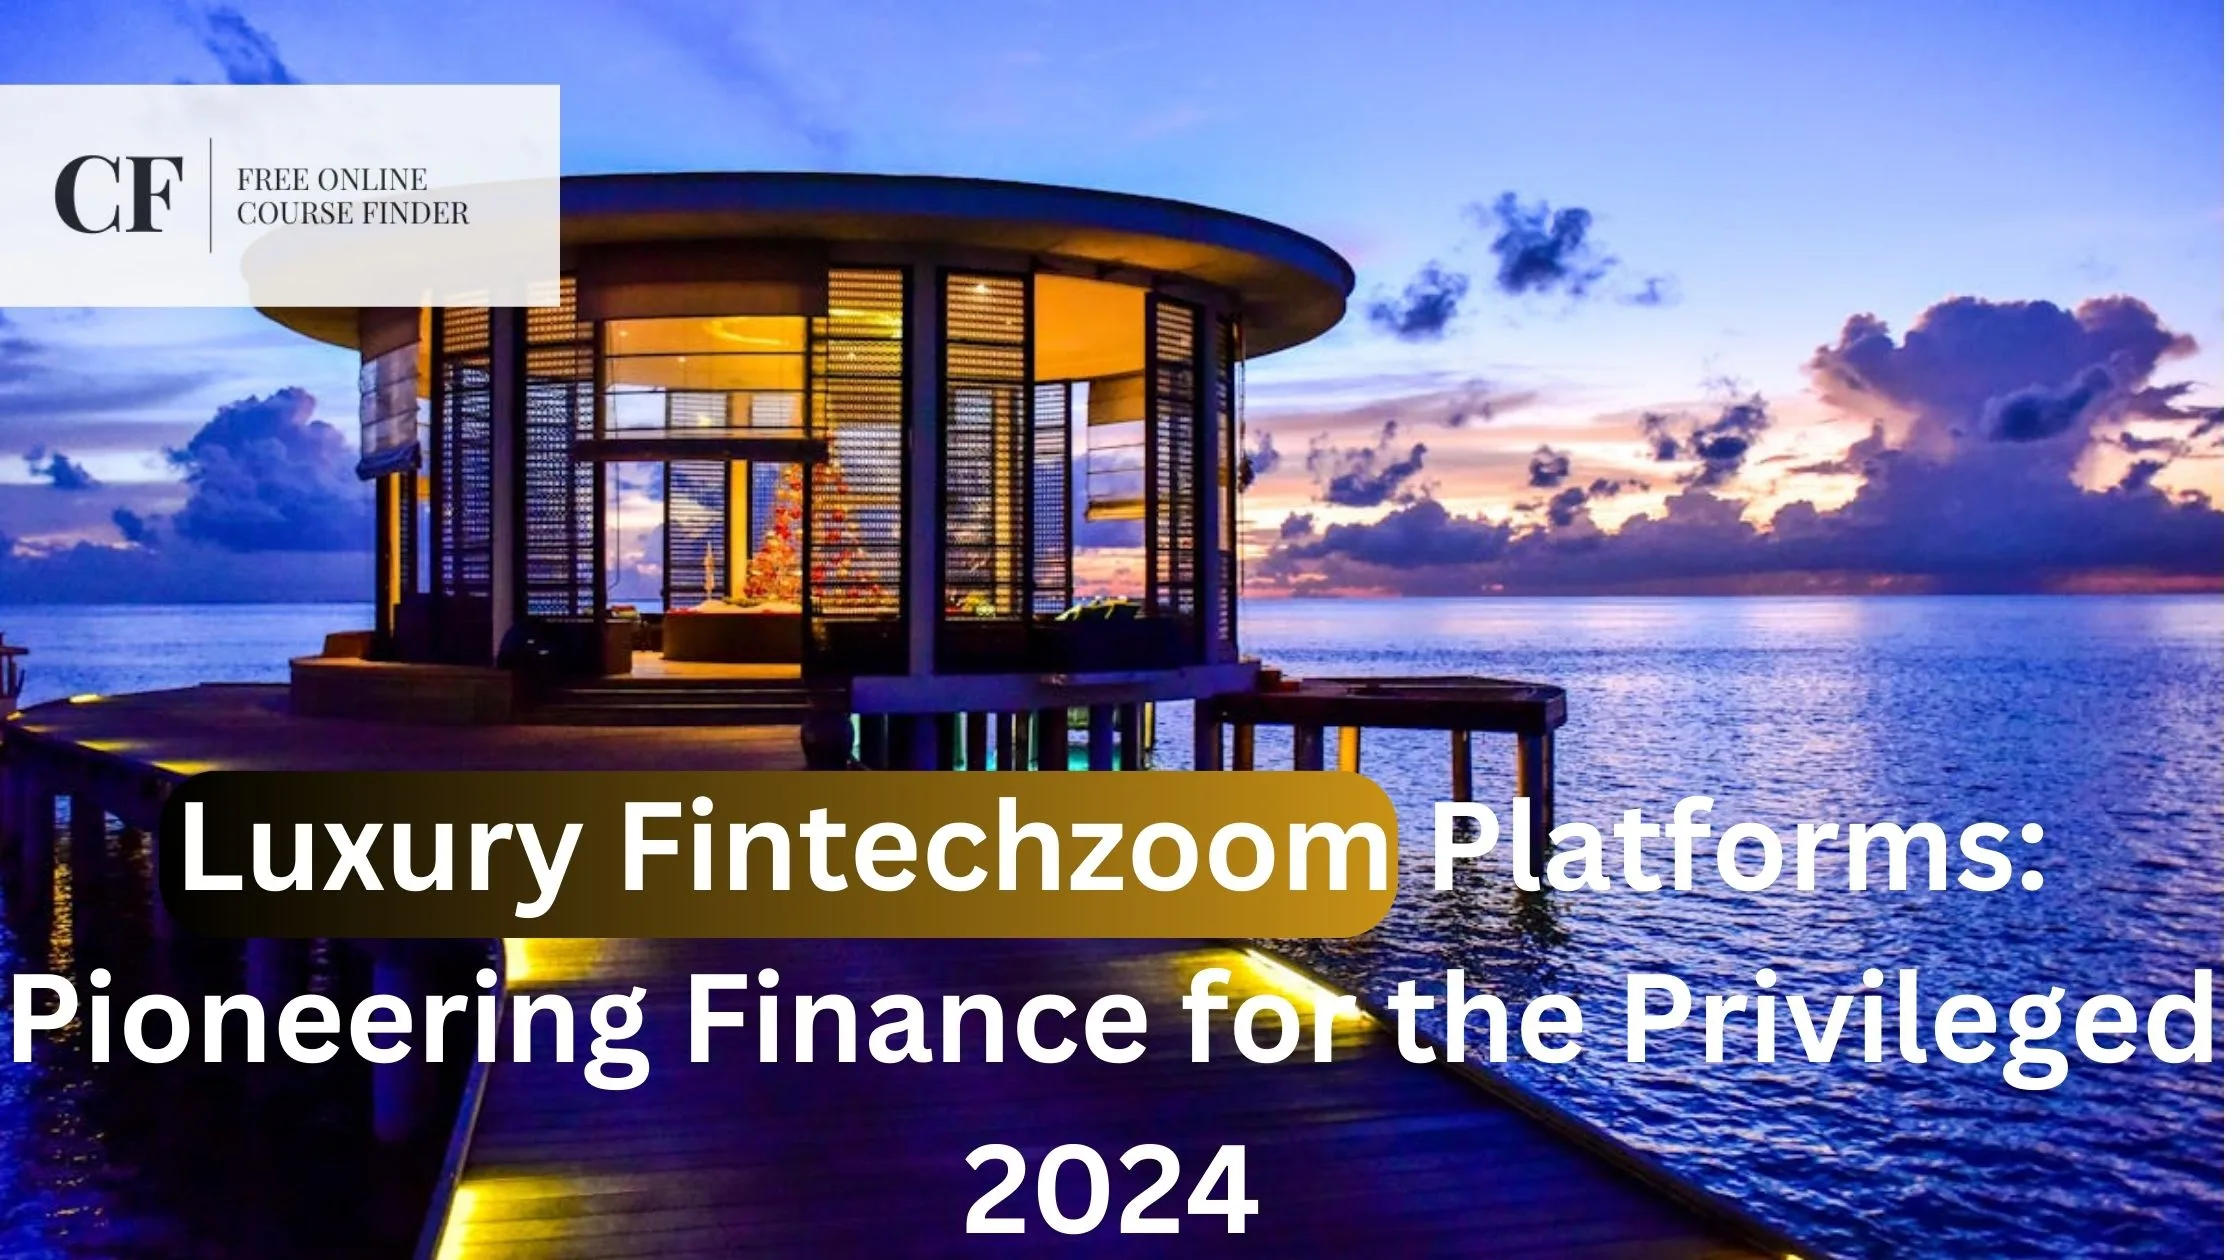 Luxury Fintechzoom Platforms: Pioneering Finance for the Privileged 2024